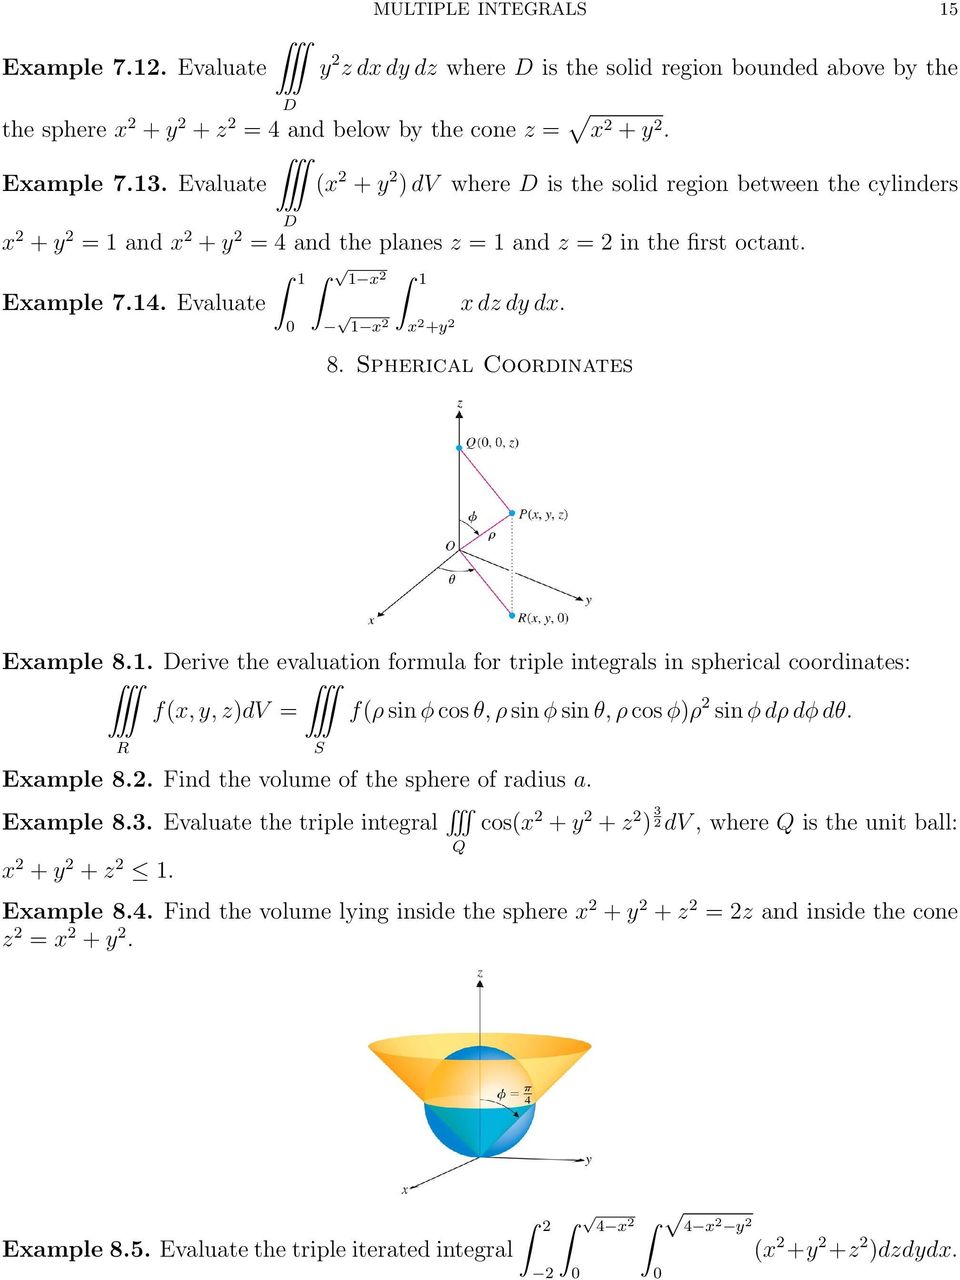 Evaluate ˆ 1 ˆ 1 x ˆ 2 1 1 x 2 x 2 +y 2 x dz dy dx. 8. Spherical Coordinates Example 8.1. erive the evaluation formula for triple integrals in spherical coordinates: f(x, y, z)dv = f(ρ sin φ cos θ, ρ sin φ sin θ, ρ cos φ)ρ 2 sin φ dρ dφ dθ.